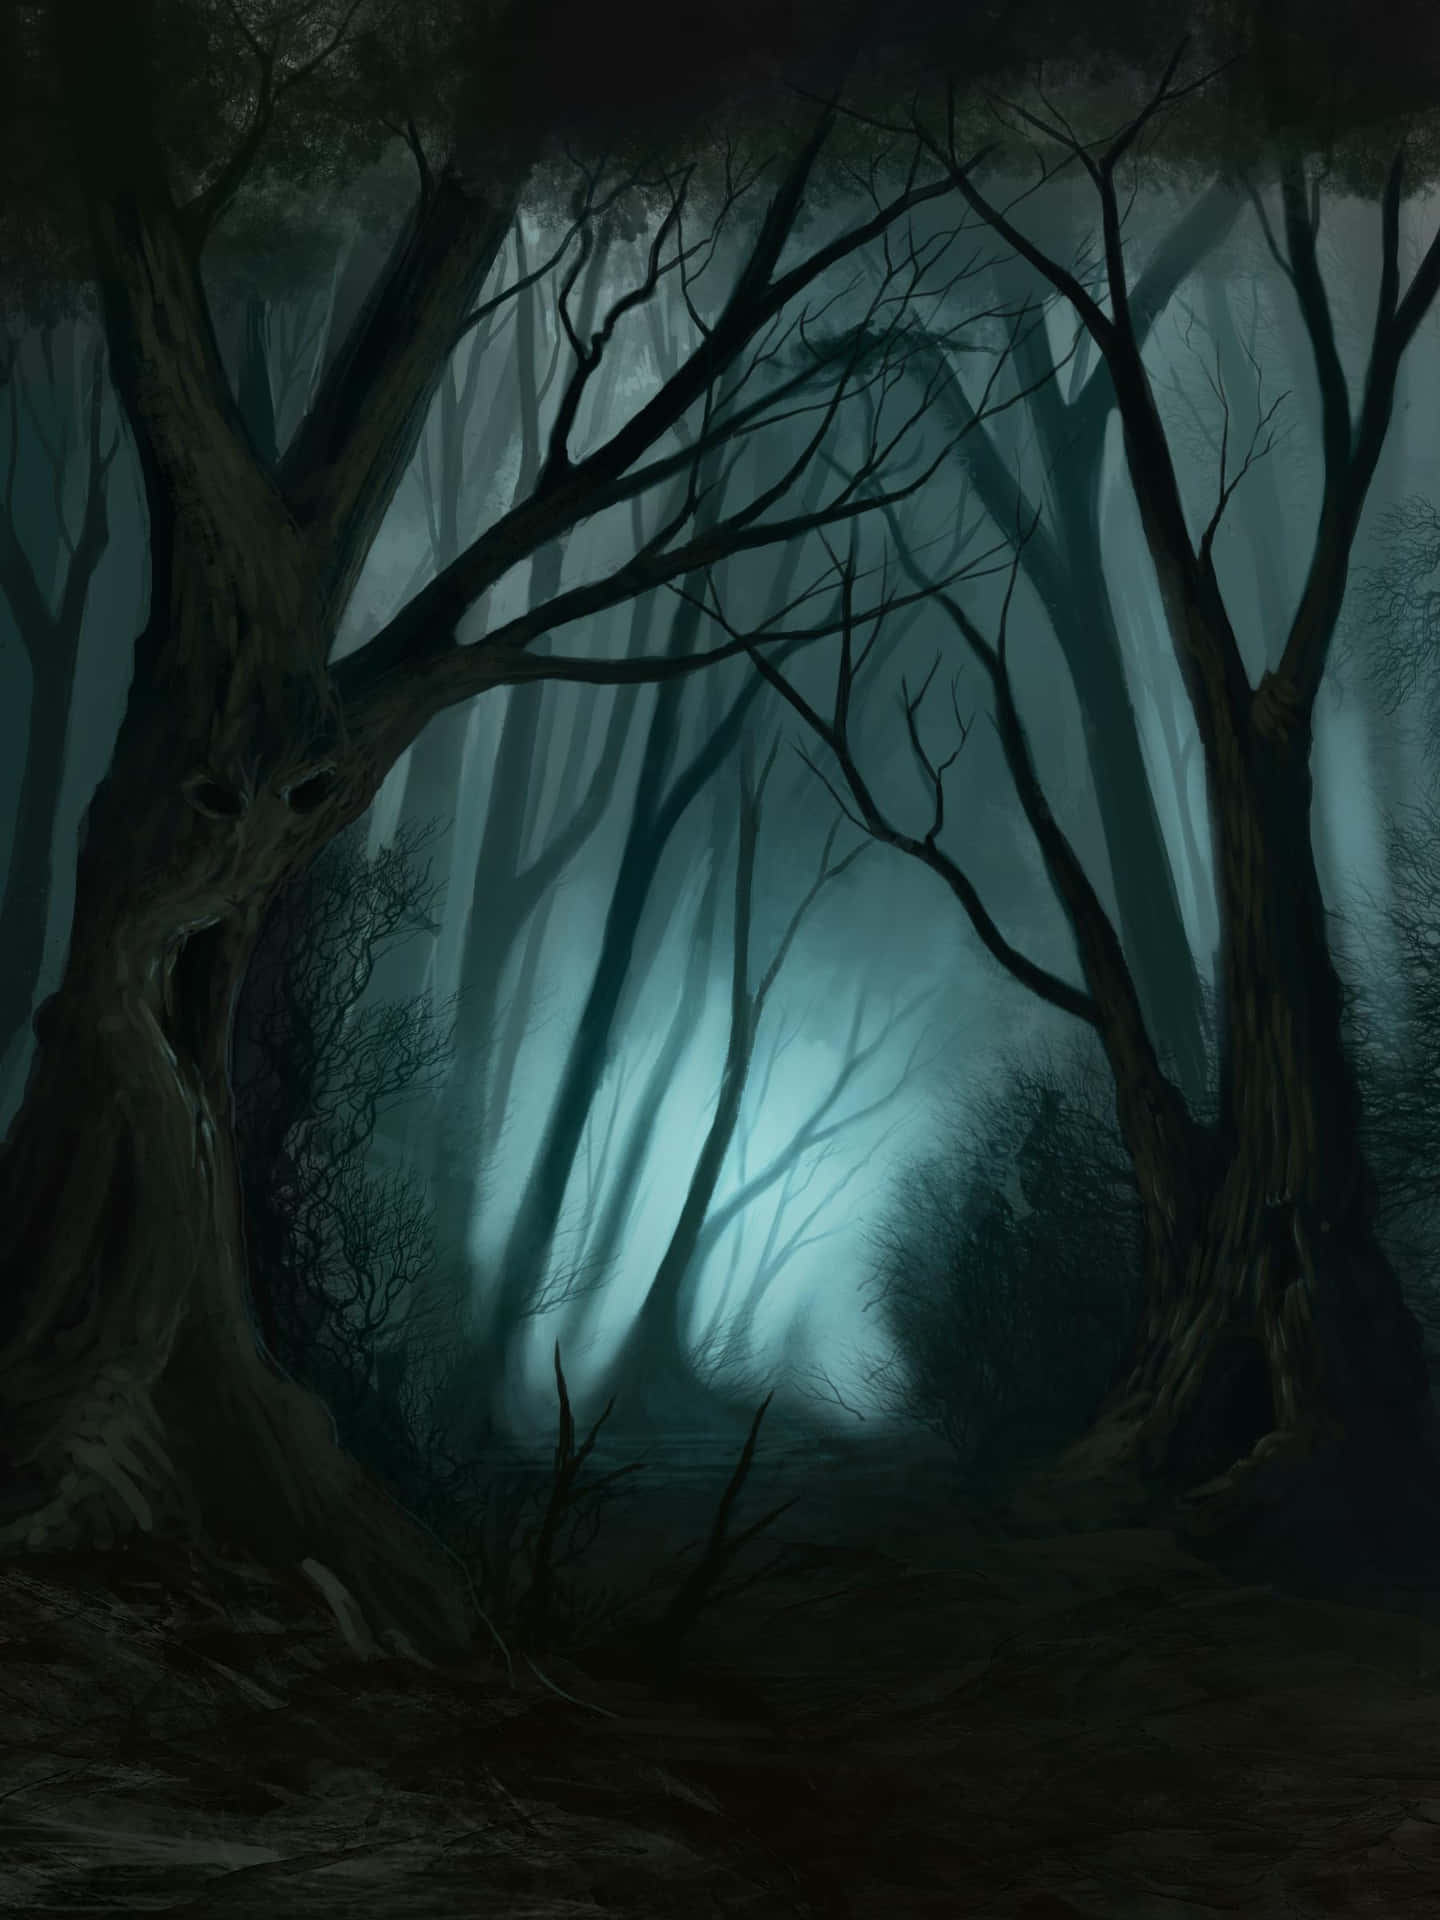 "A Gloomy and Sinister Feeling filled the air of the Haunted Forest" Wallpaper